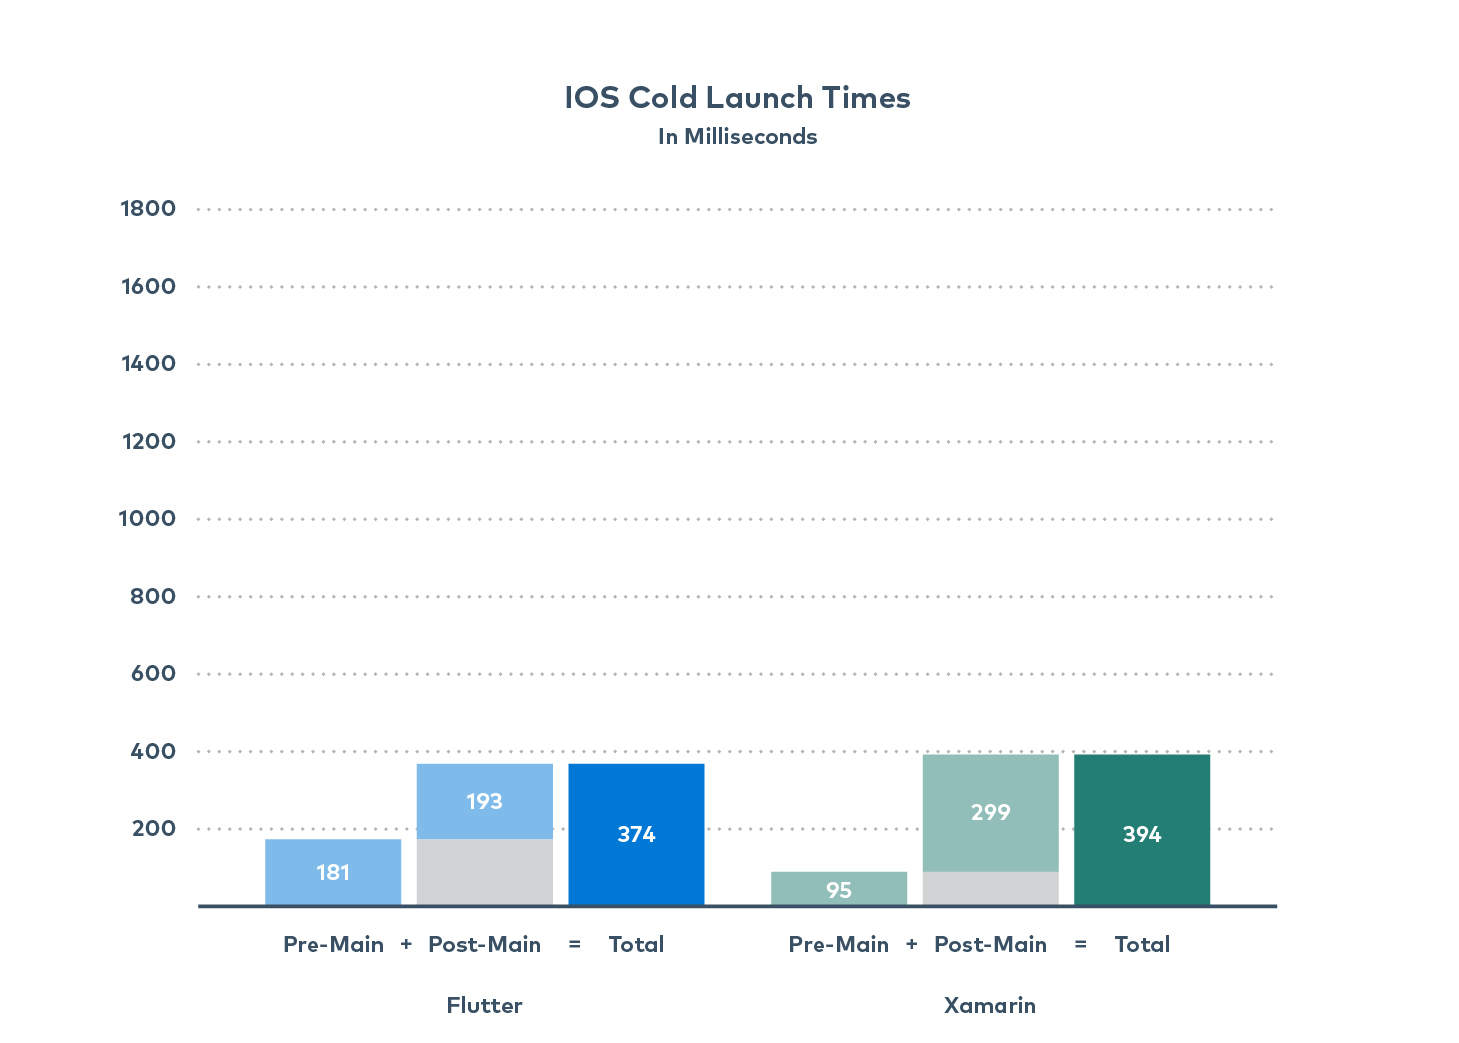 Graphic of a bar chart comparing “Flutter” and “Xamarin”. The title of the graph reads “IOS Cold Launch Times in Milliseconds”.